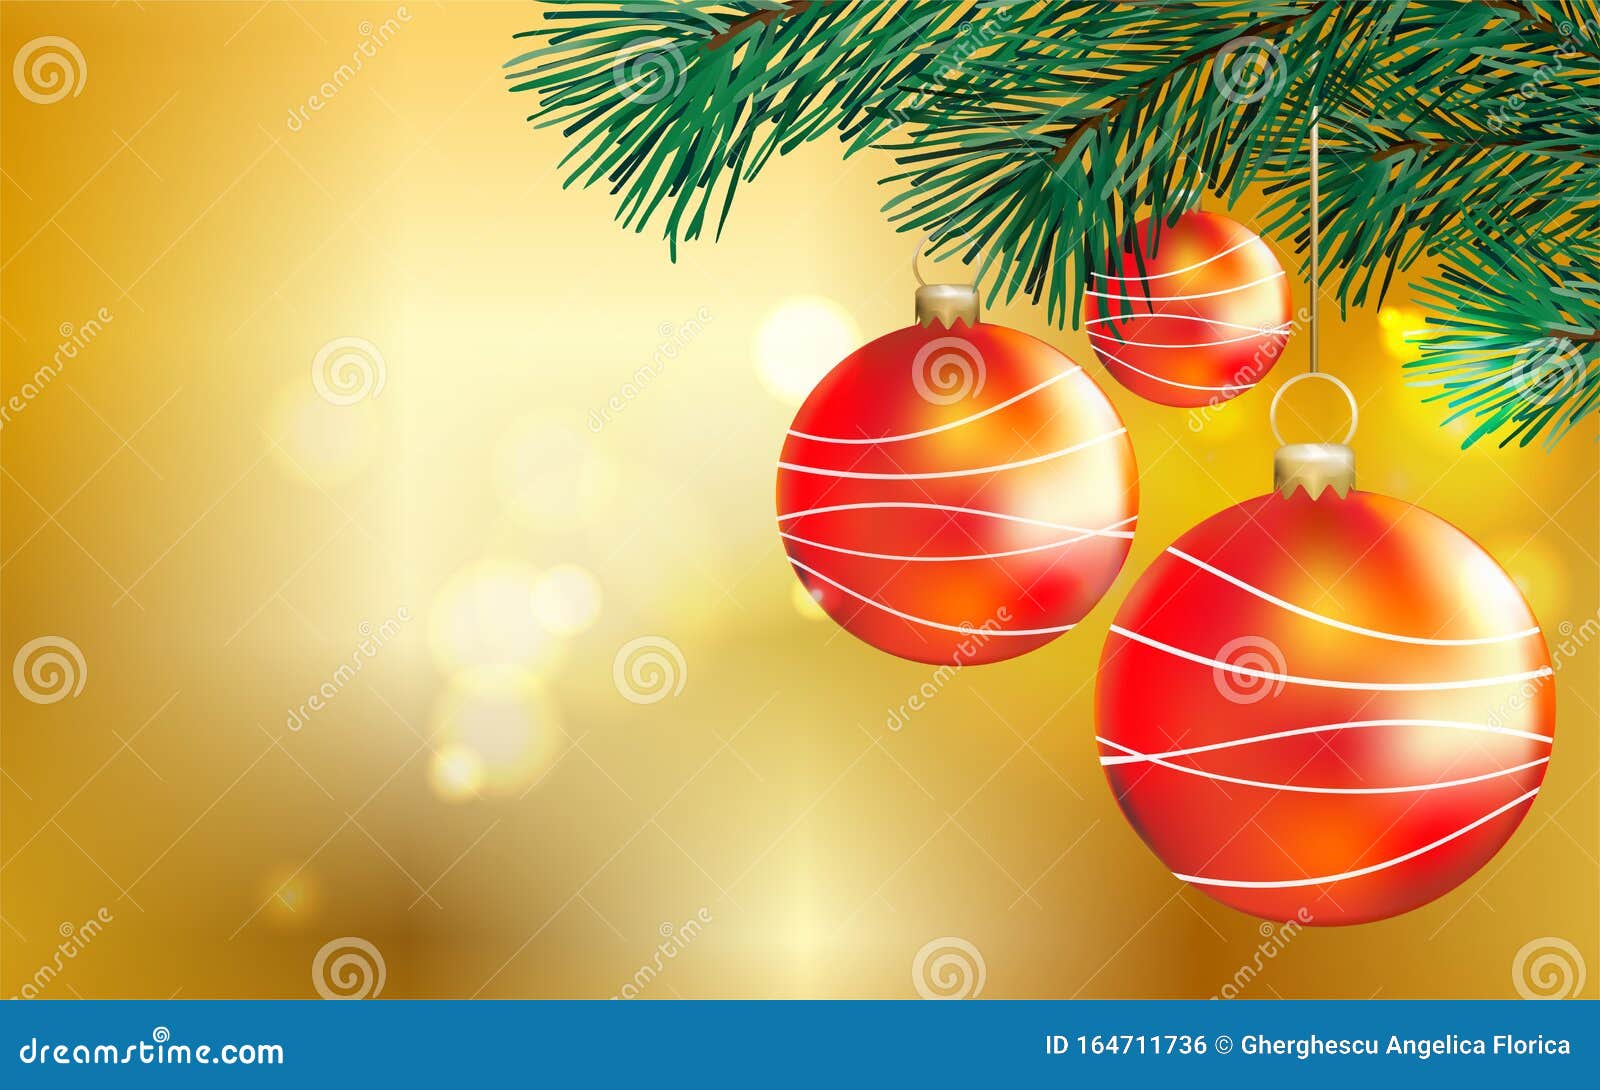 Christmas Banner with Decorated Orange Balls and Fir Branches - Vector ...